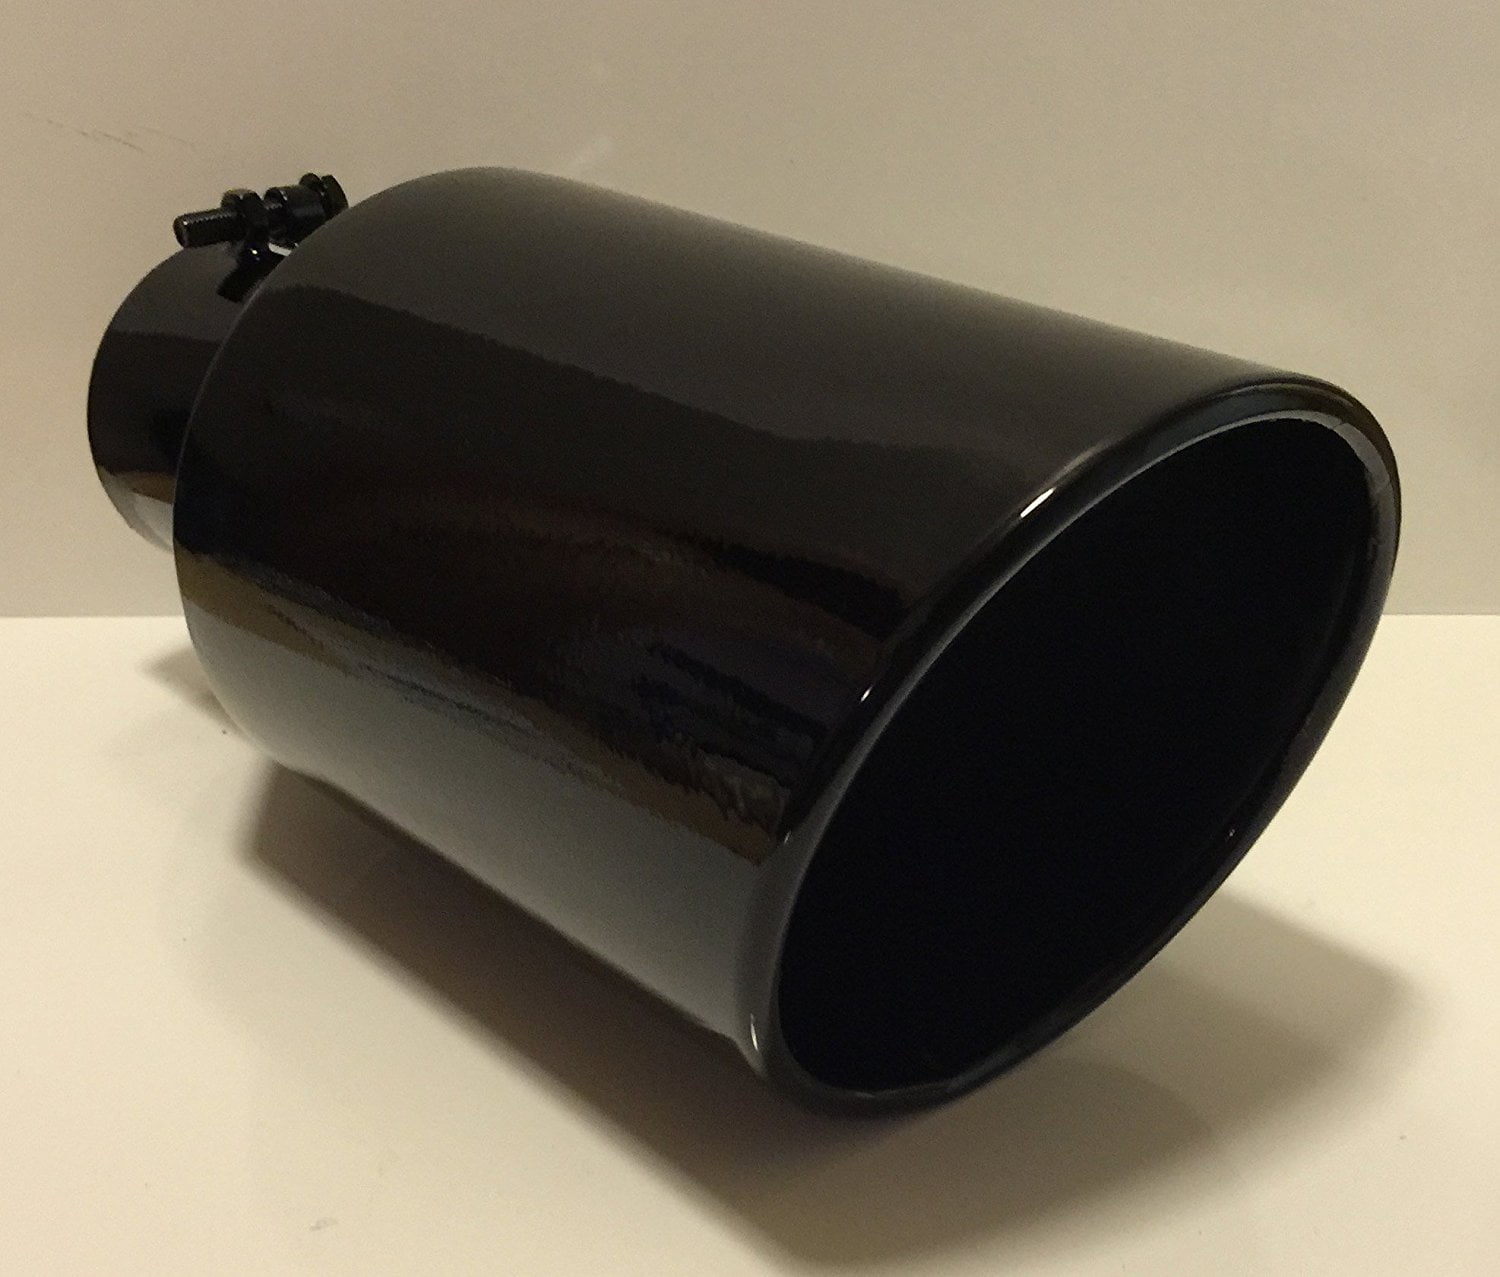 Black Bolt On Exhaust Tip Pipe for Diesel Truck 4" Inlet 7" Outlet 15" Long 